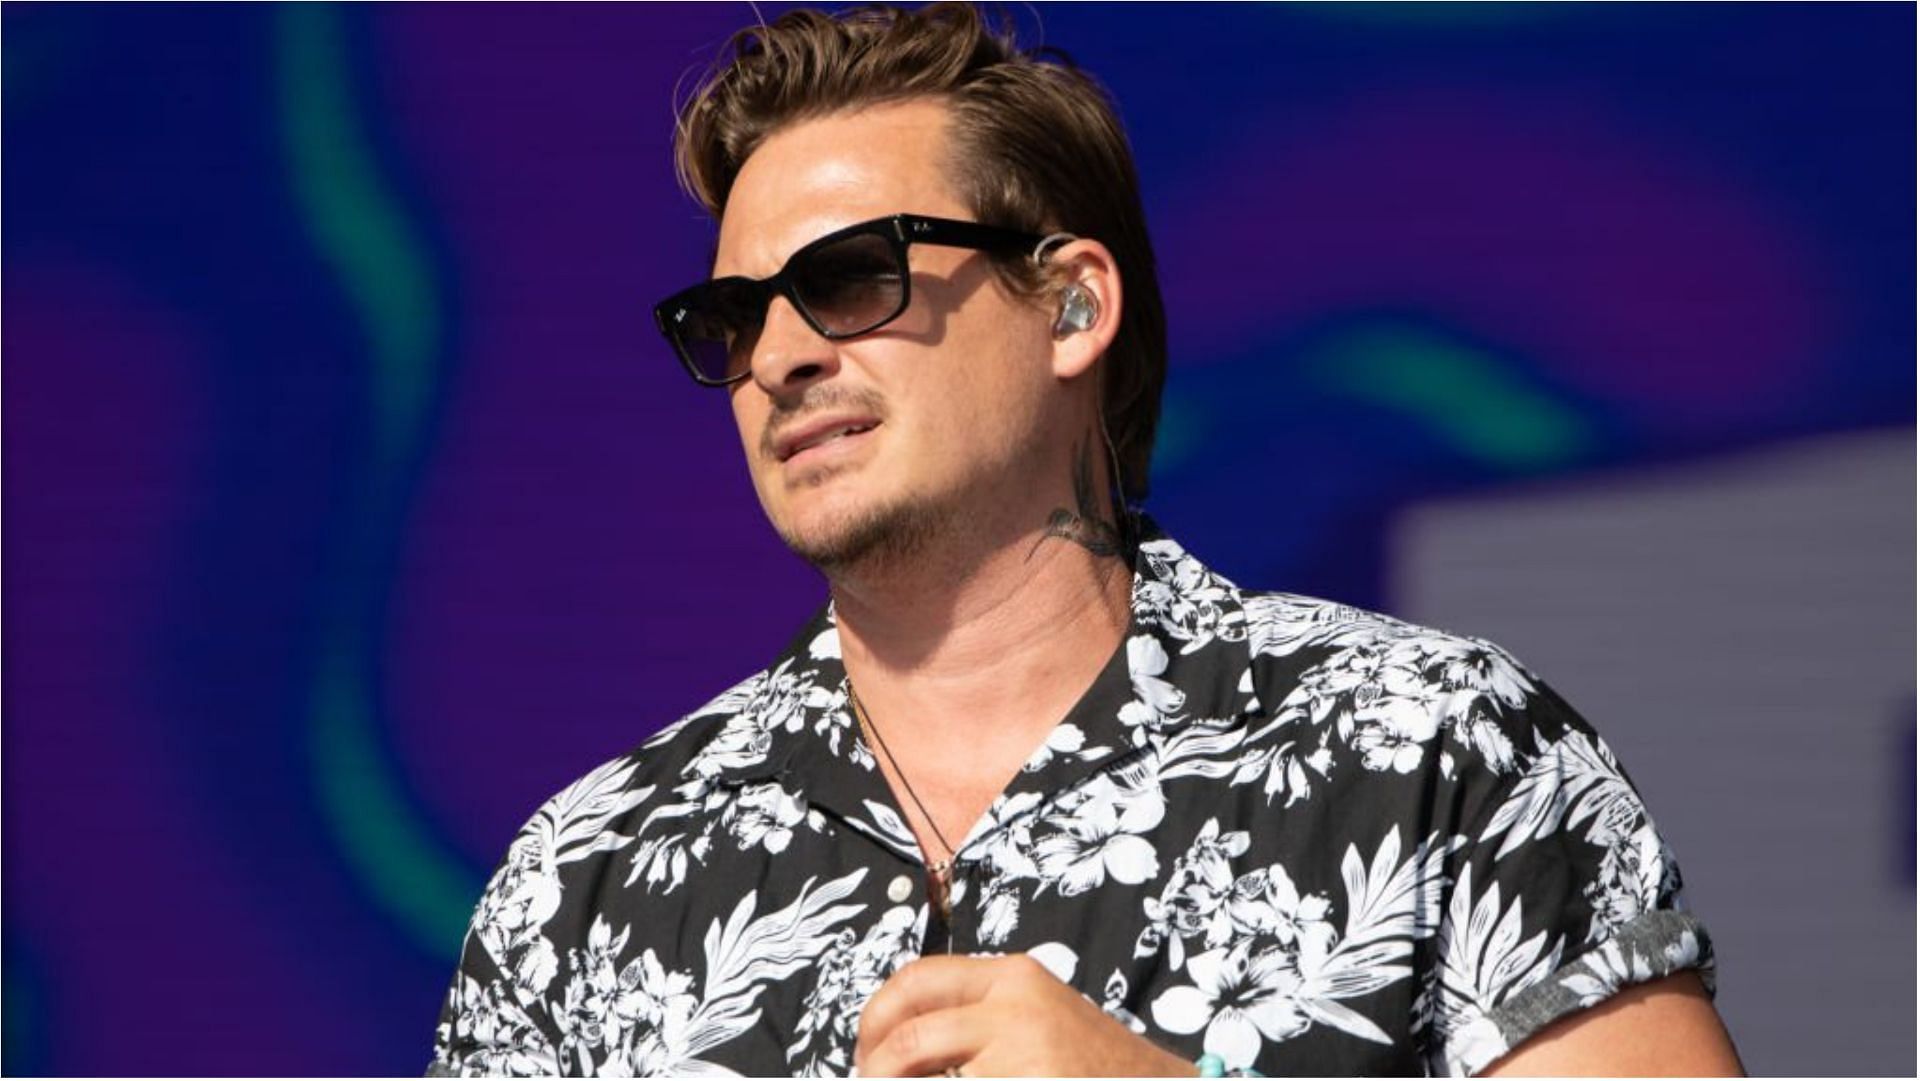 Lee Ryan&#039;s net worth has been reduced due to his legal issues (Image via Joseph Okpako/Getty Images)